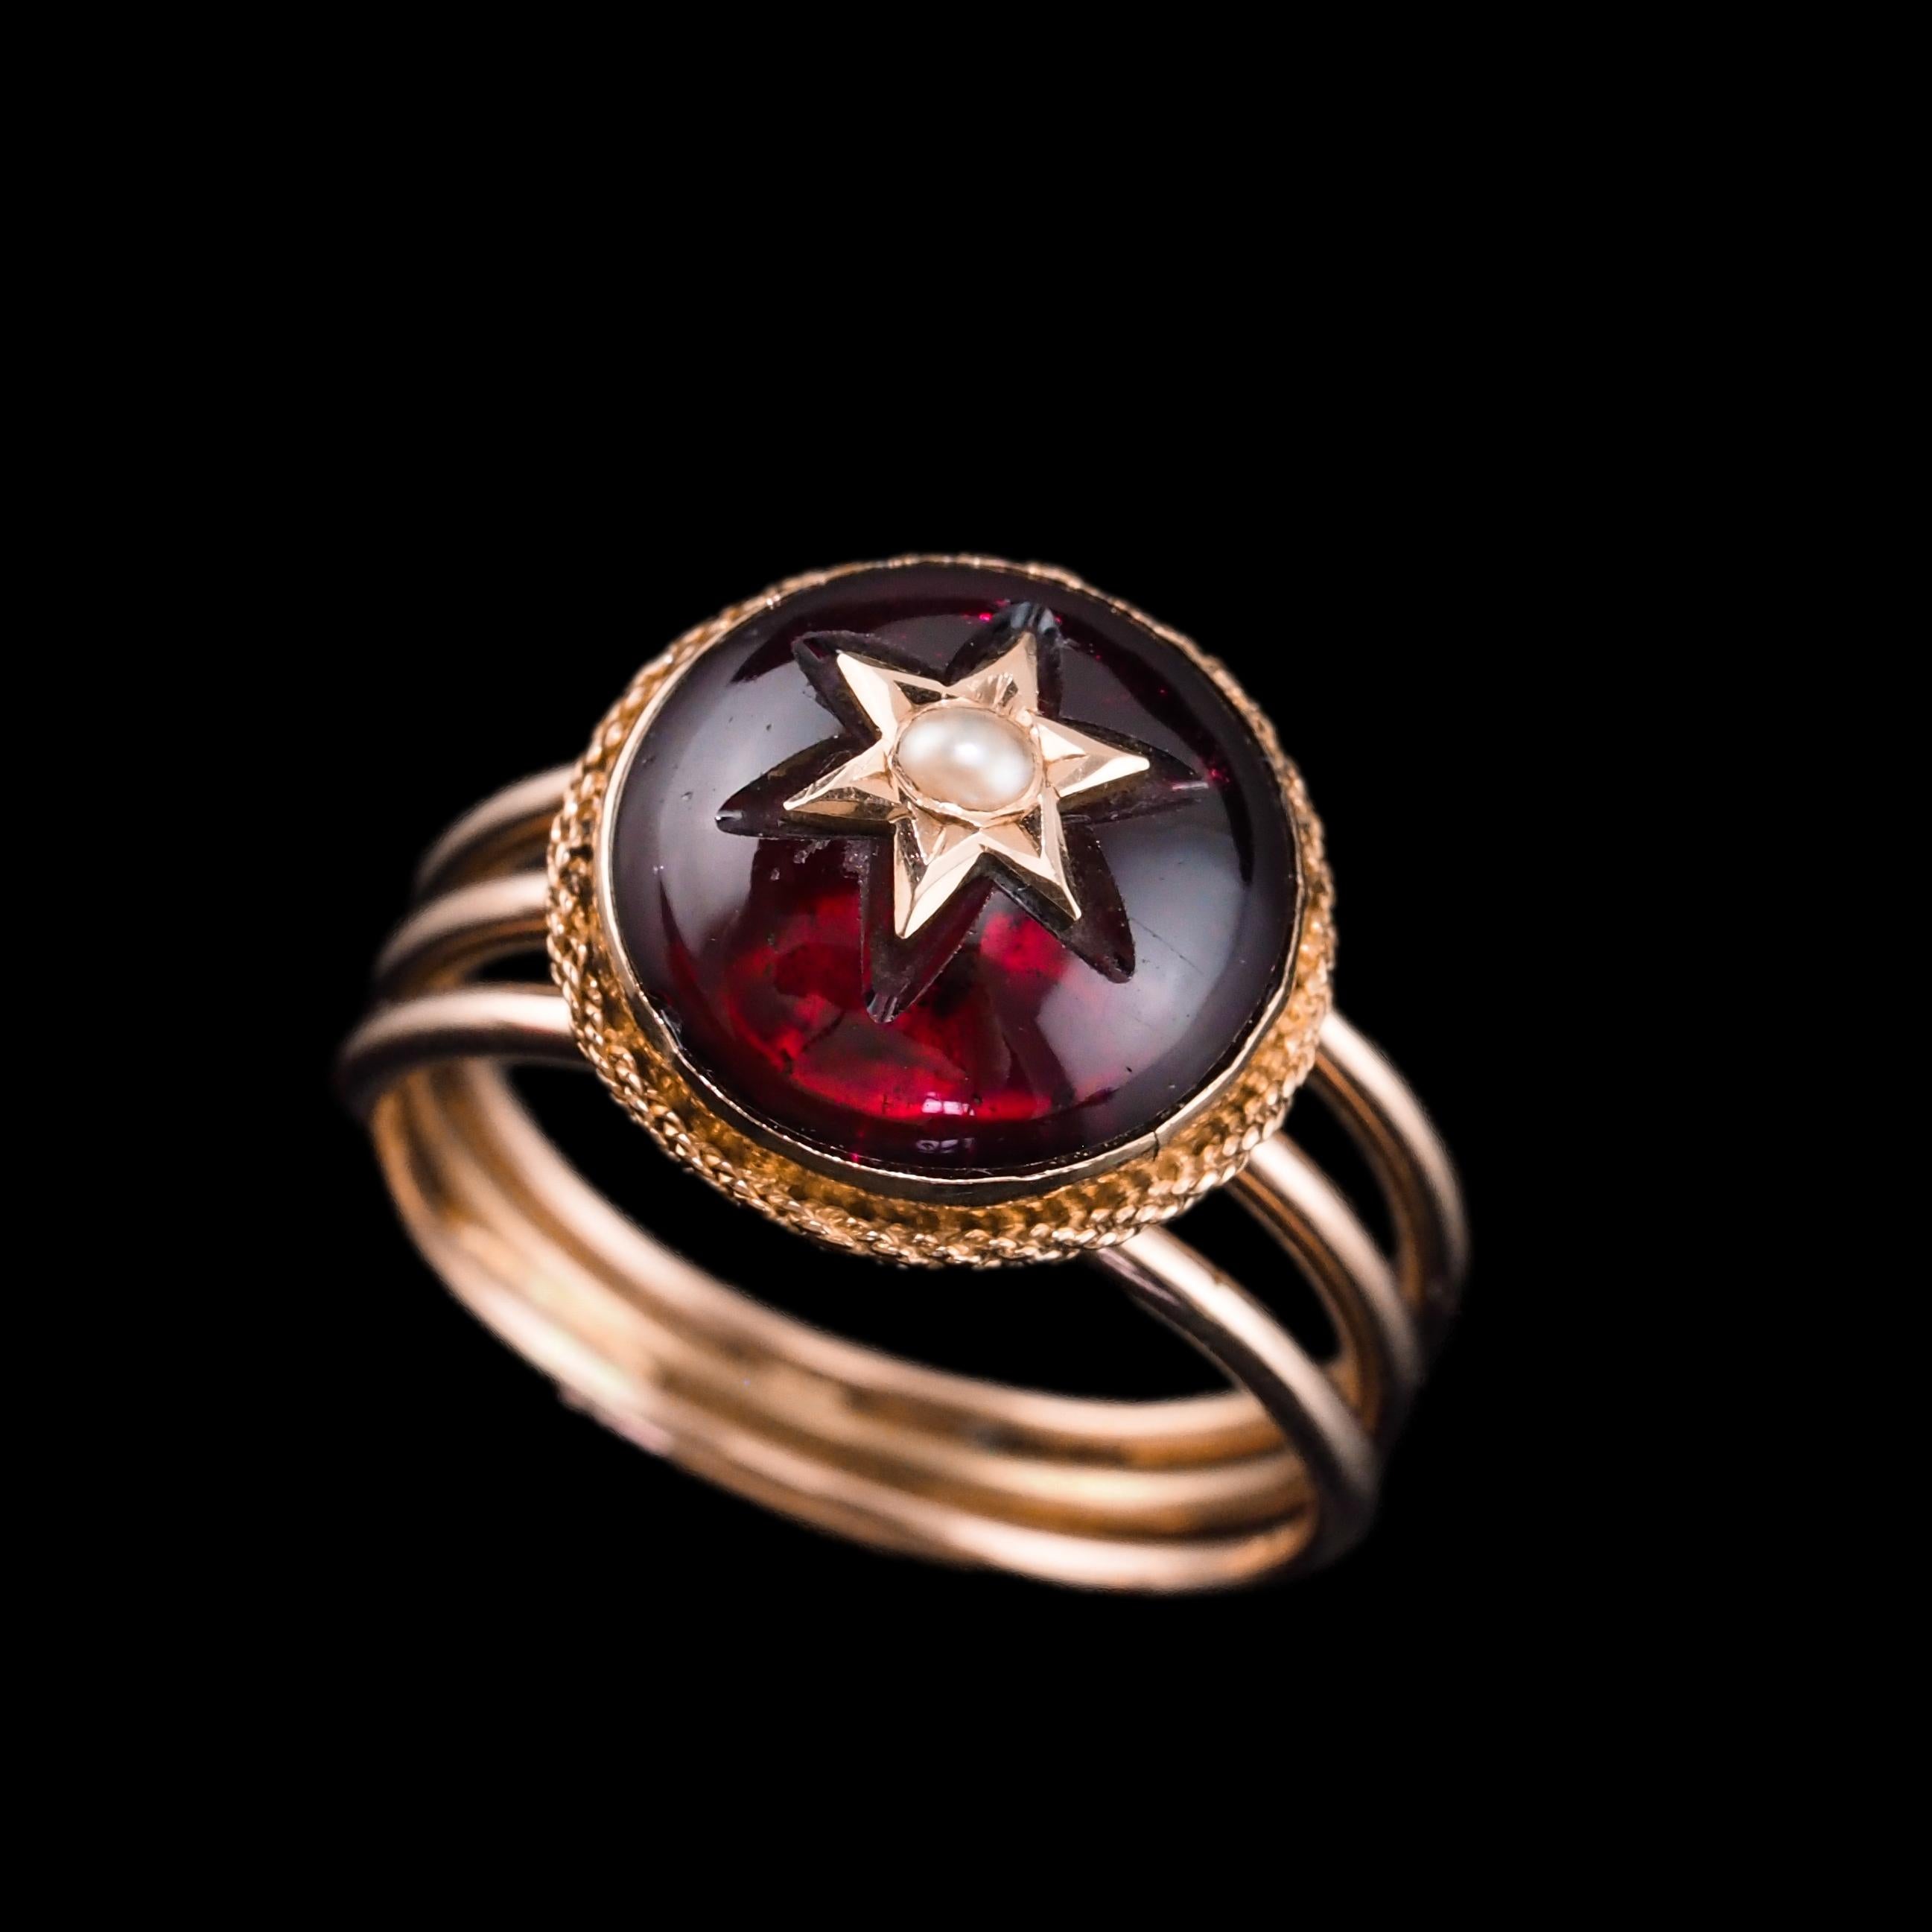 Antique Victorian 14K Gold Garnet Star Cabochon Ring with Seed Pearl - c.1880 In Good Condition For Sale In London, GB